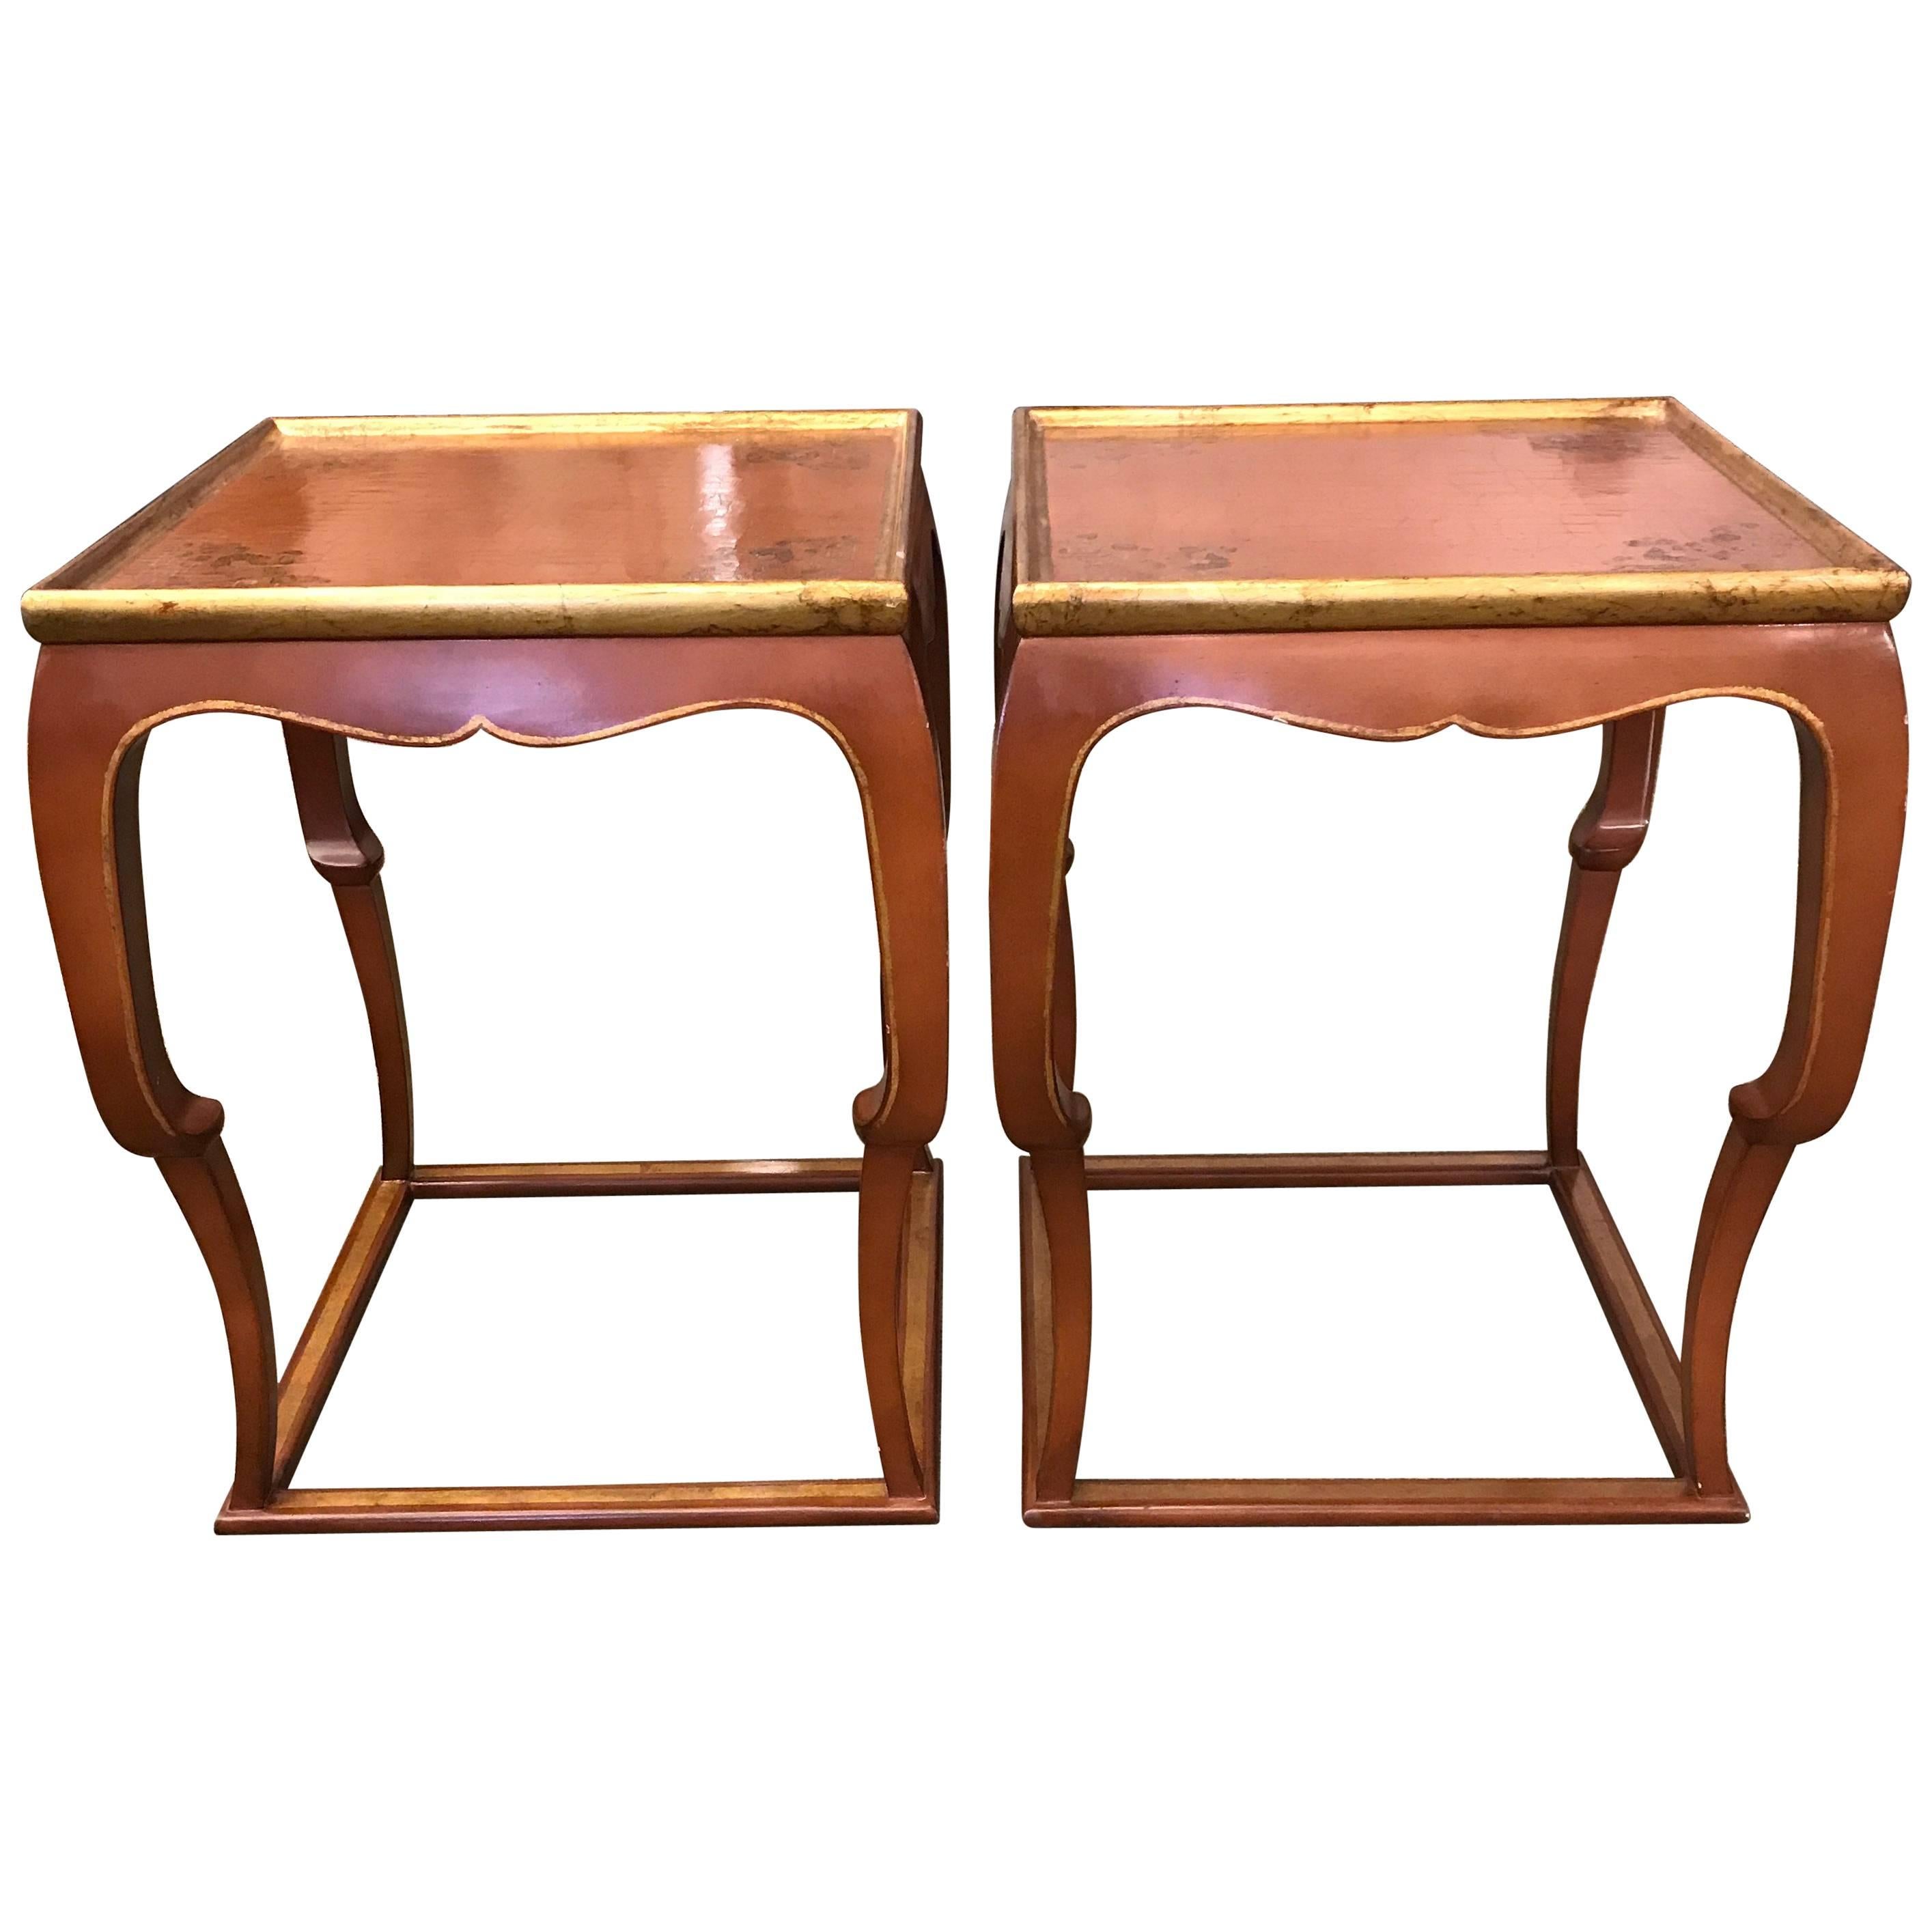 Pair of Chinoiserie Side Tables